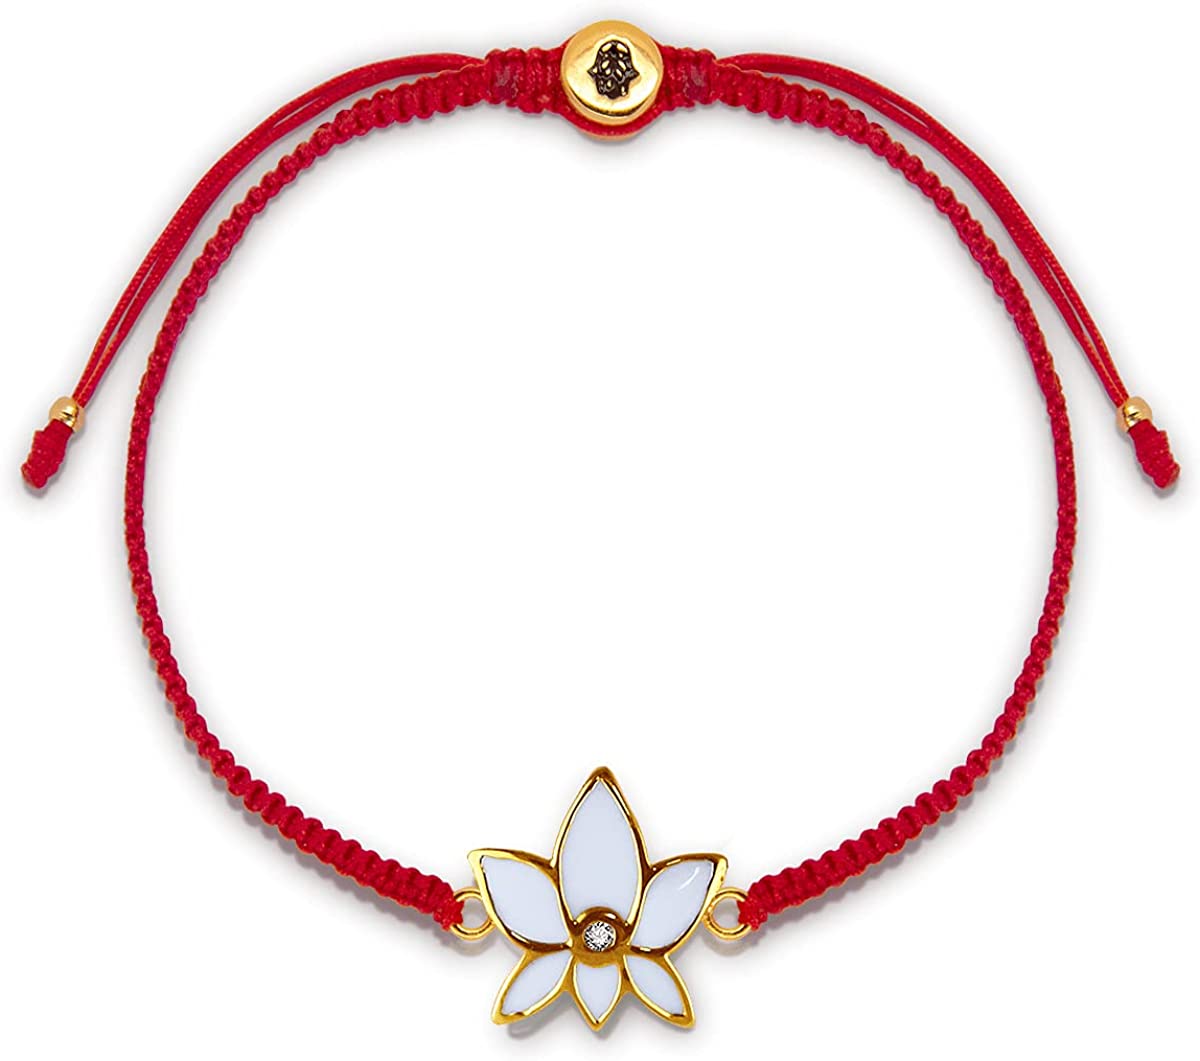 Karma and Luck - Obstacle Crusher - Women's 18K Gold Plated Brass Elegant Lotus Charm Red String Adjustable Bracelet to Help You To Achieve Enlightenment Handmade with Love in Bali